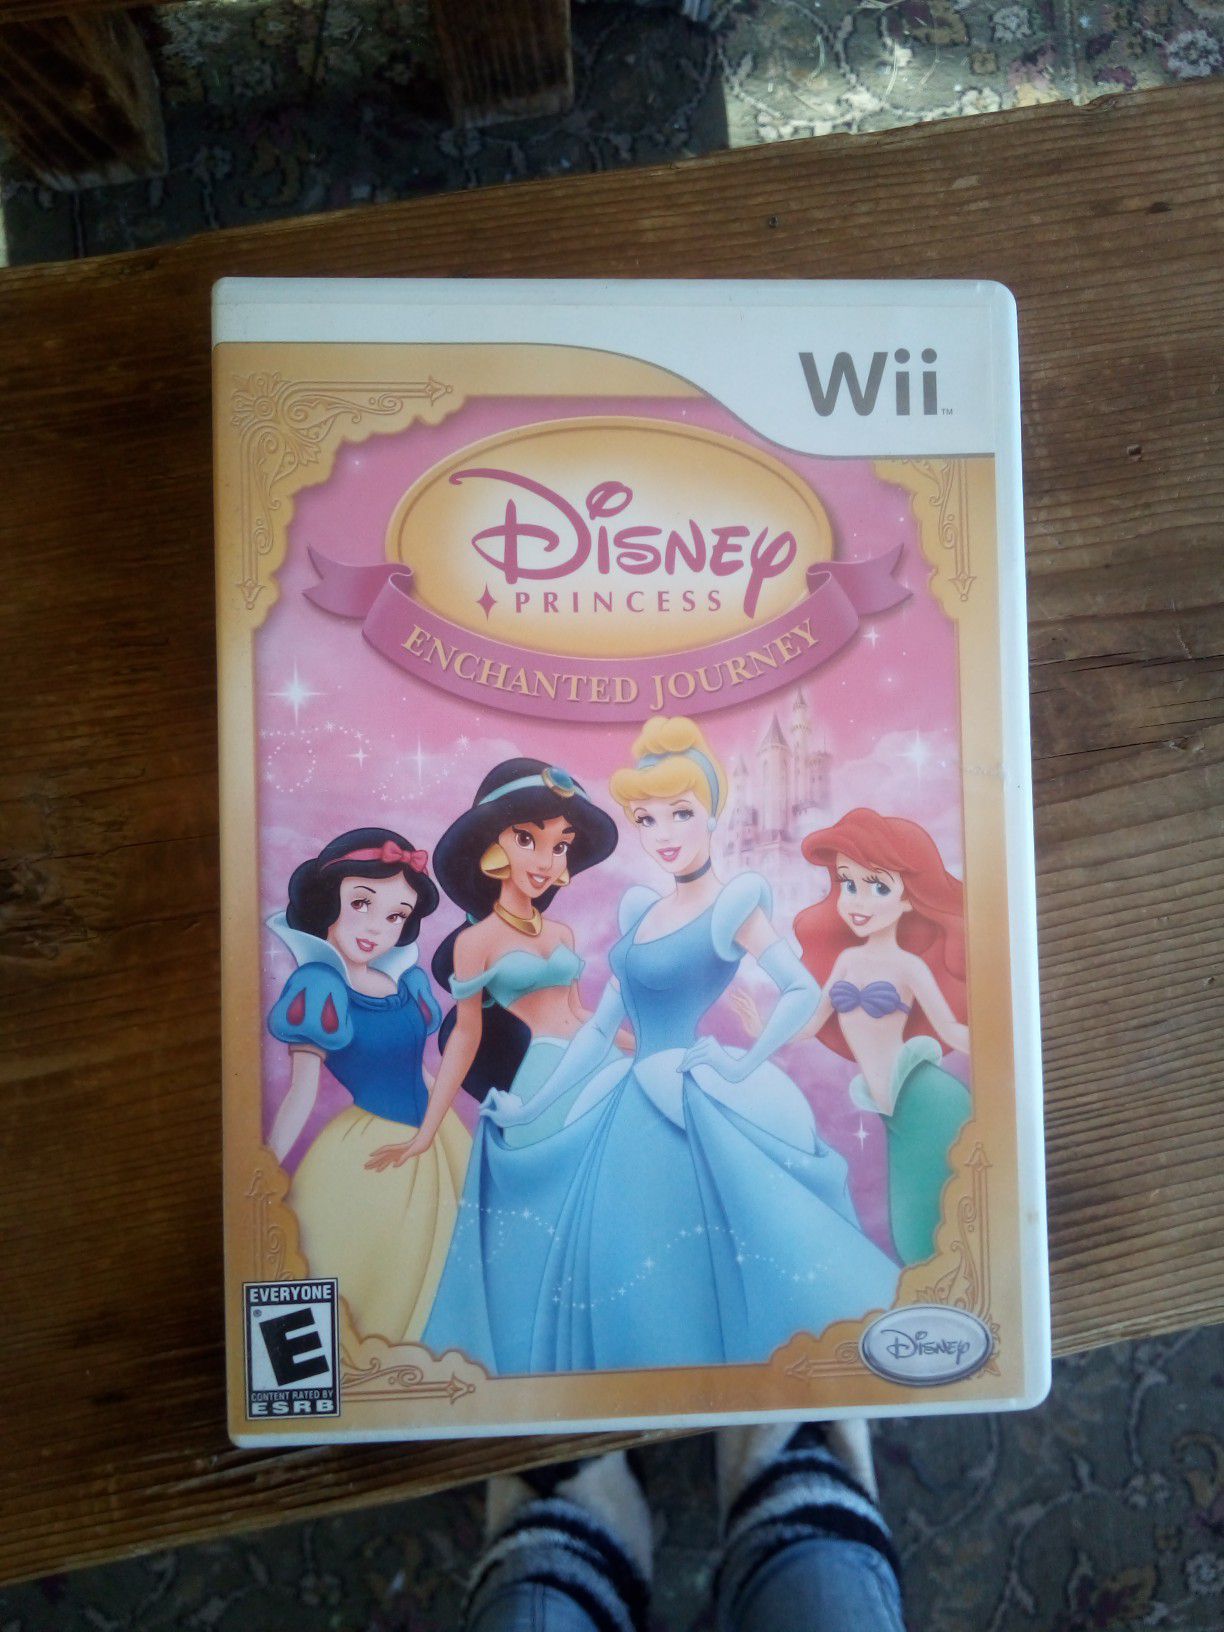 Disney princesses the game for the Wii asking $10 must pick up